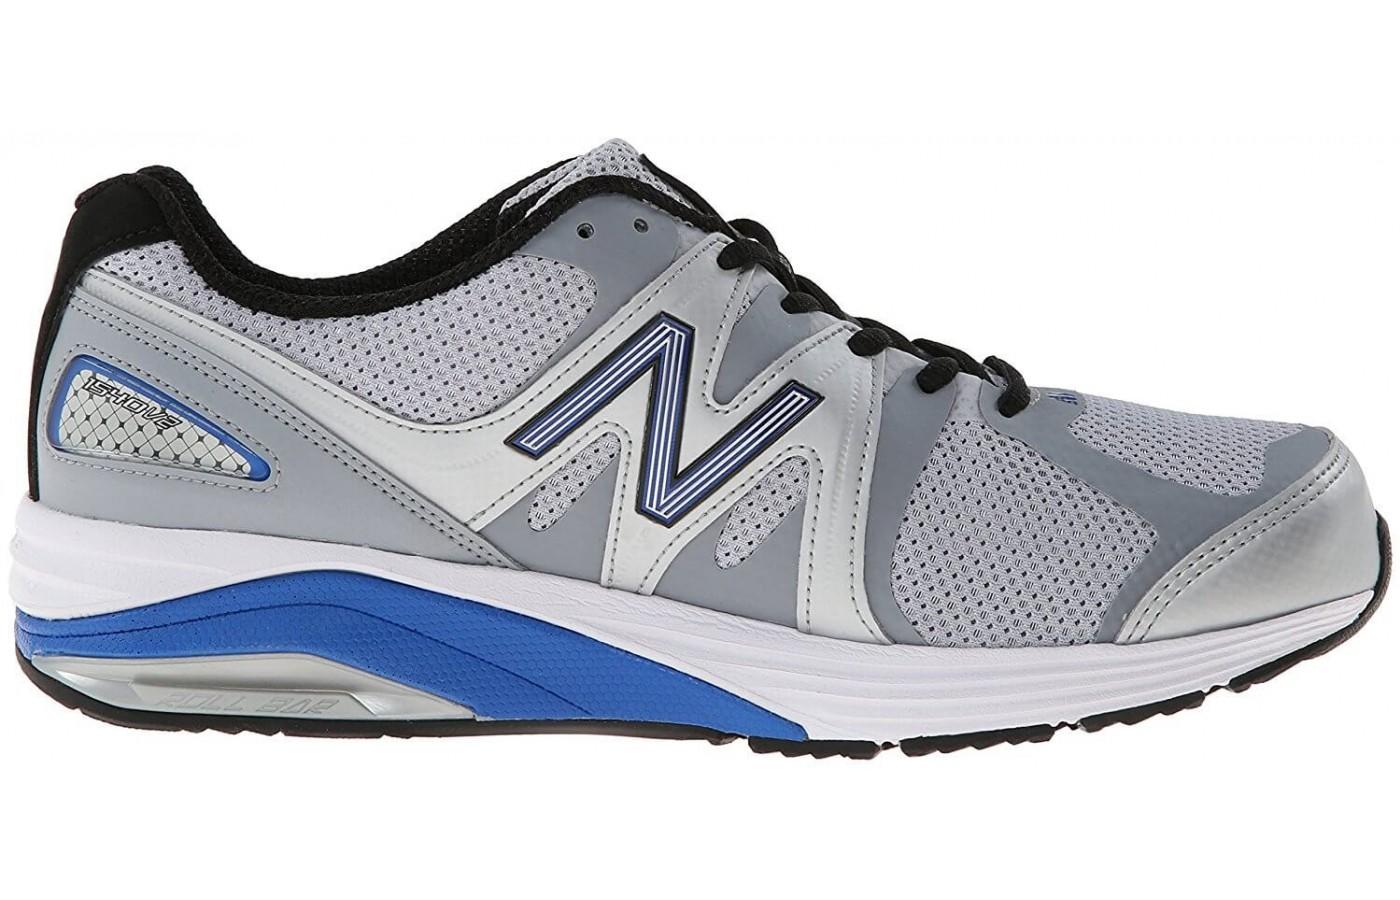 the New Balance 1540 v2's thick midsole gives stability and cushioning